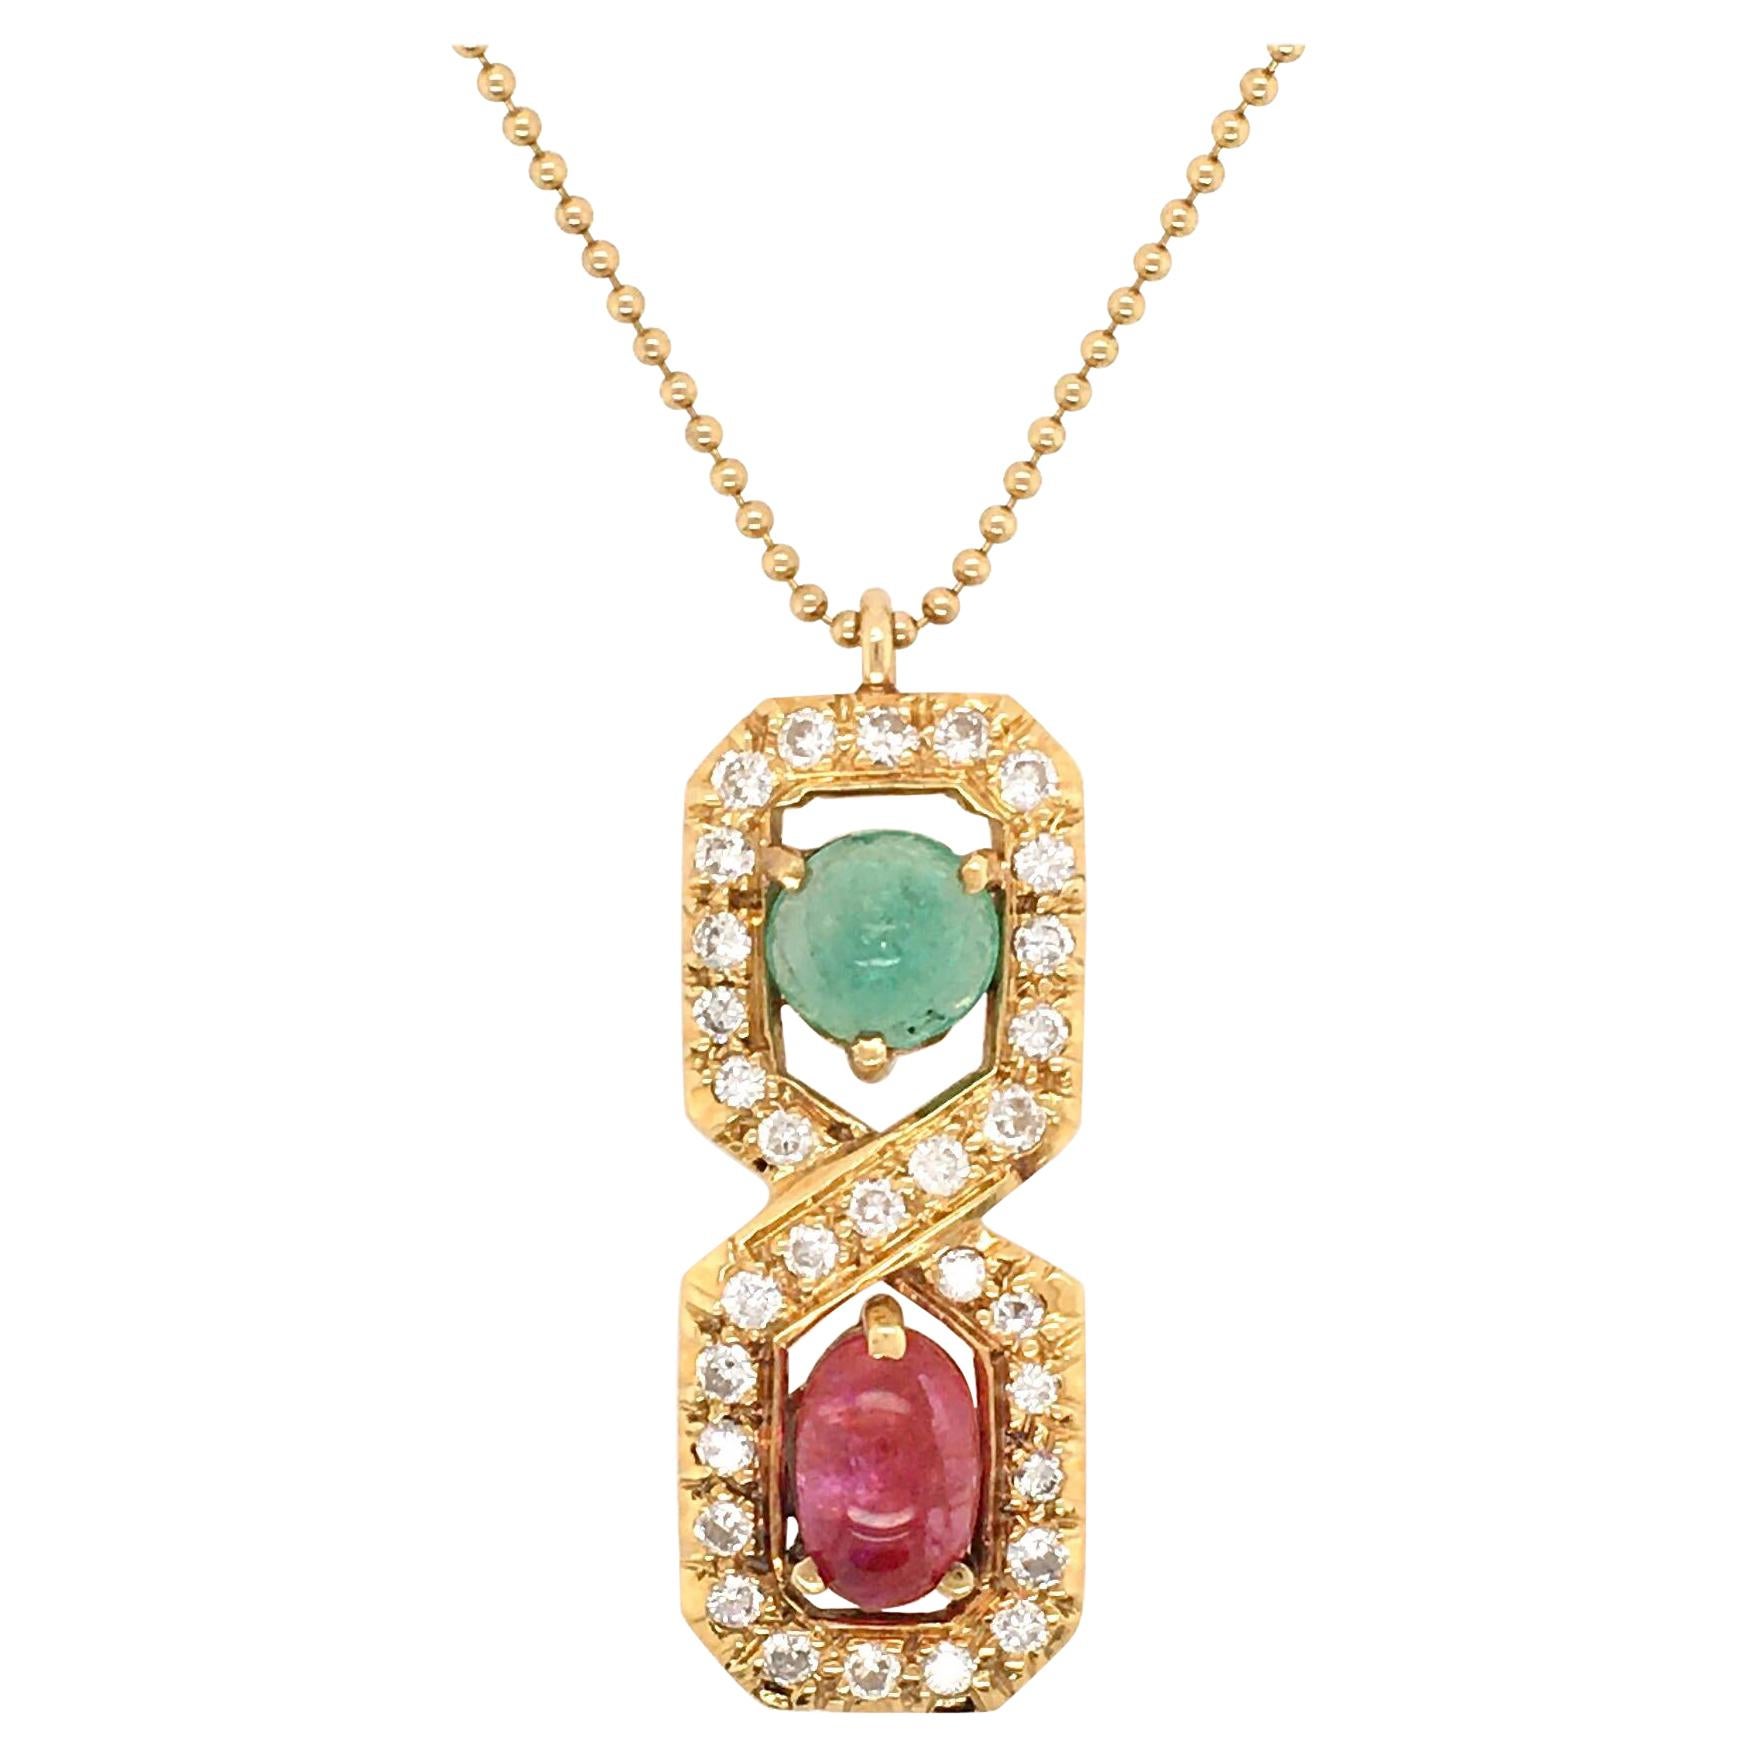 Gold, Ruby, Emerald and Diamond Pendant Necklace